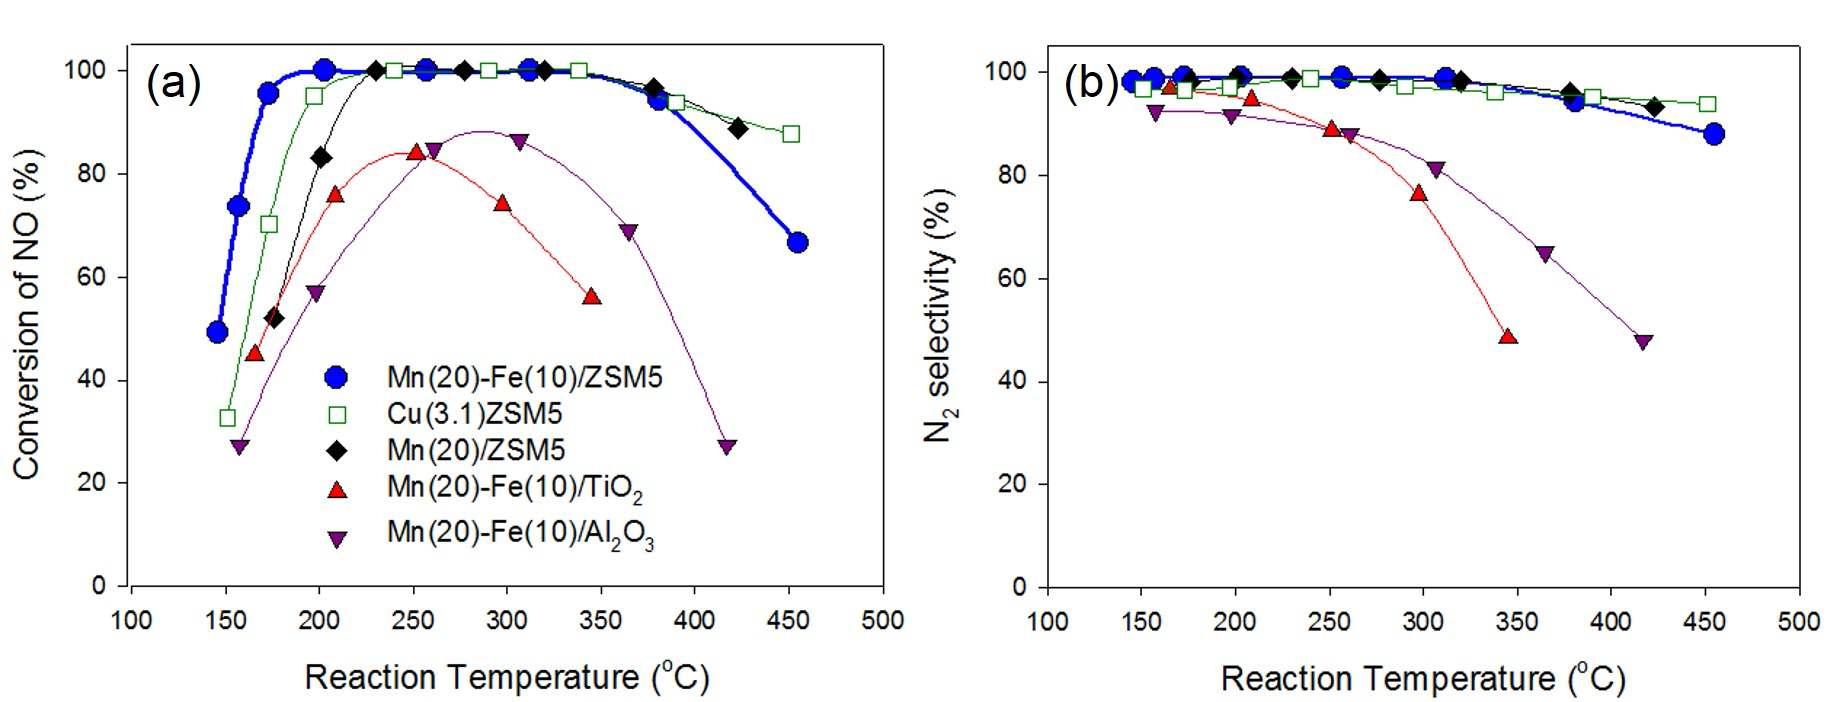 DeNOx activity (a) and N2 selectivity (b) over the Mn-based and CuZSM5 catalysts. Feed gas composition: 500 ppm NO, 500 ppm NH3, 5% O2, 10% H2O and N2 balance. GHSV=100,000 h-1. N2 selectivity=[(conversion of NO+NH3)-(formation of N2O+NO2)]/(conversion of NO+NH3).